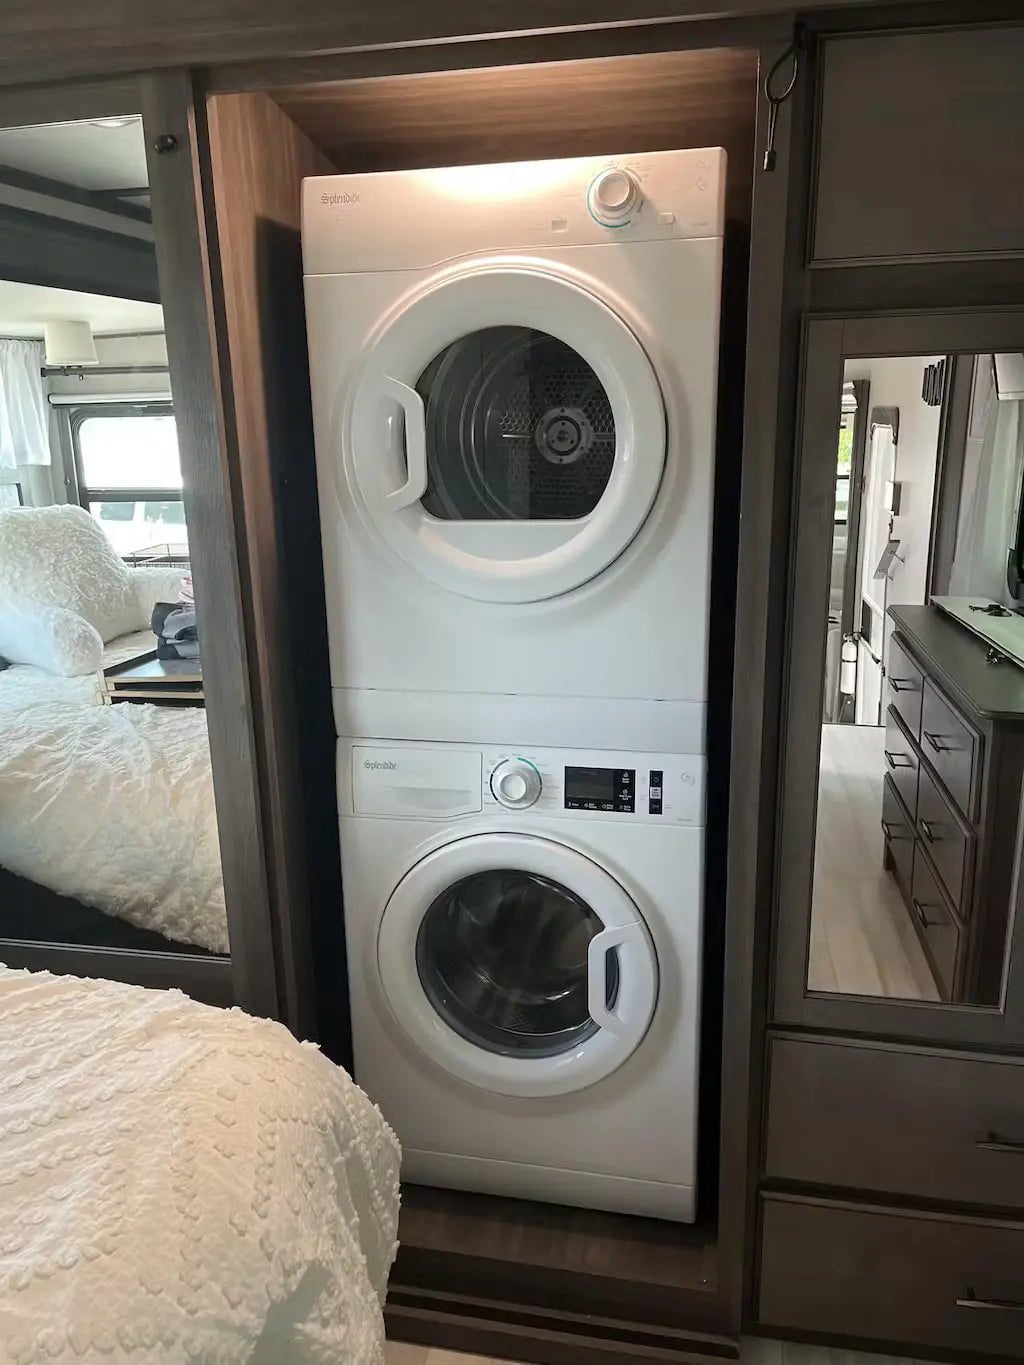 2 In 1 Washer Dryer Combo. Great For Limited Space! All Electric